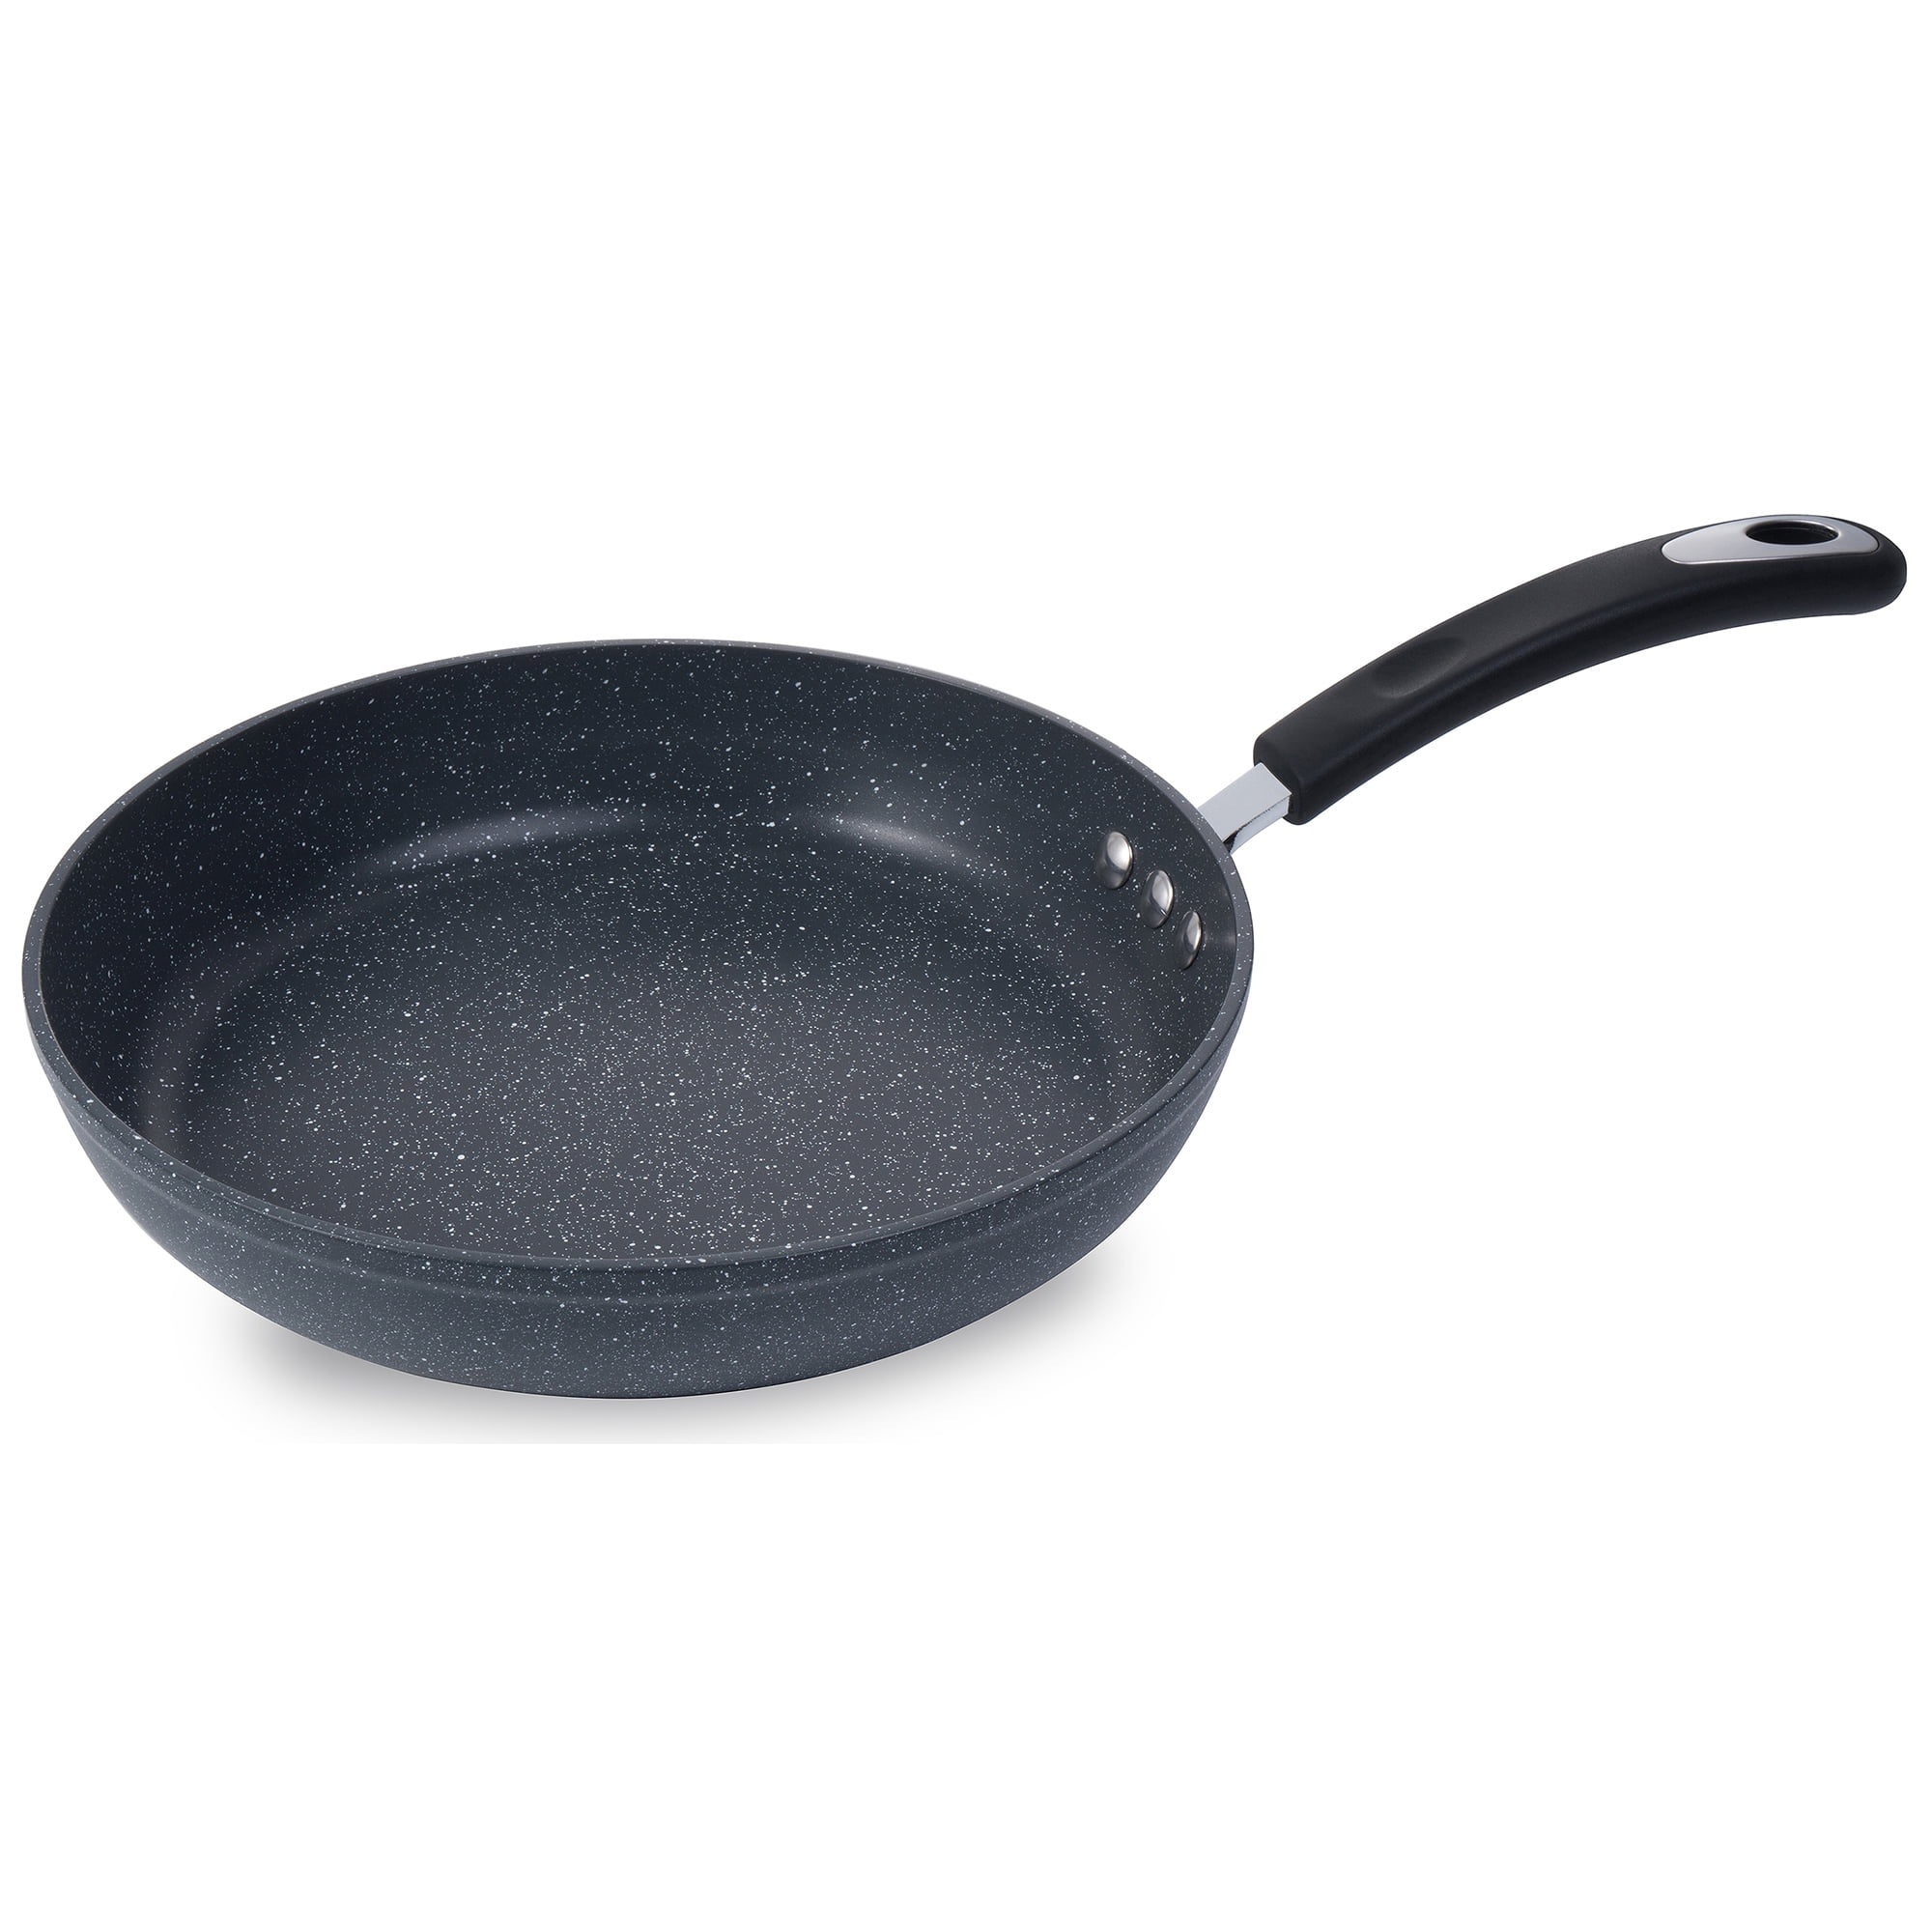 steek kaping Tram 8" Stone Earth Frying Pan by Ozeri, with 100% APEO & PFOA-Free Stone-Derived  Non-Stick Coating from Germany - Walmart.com